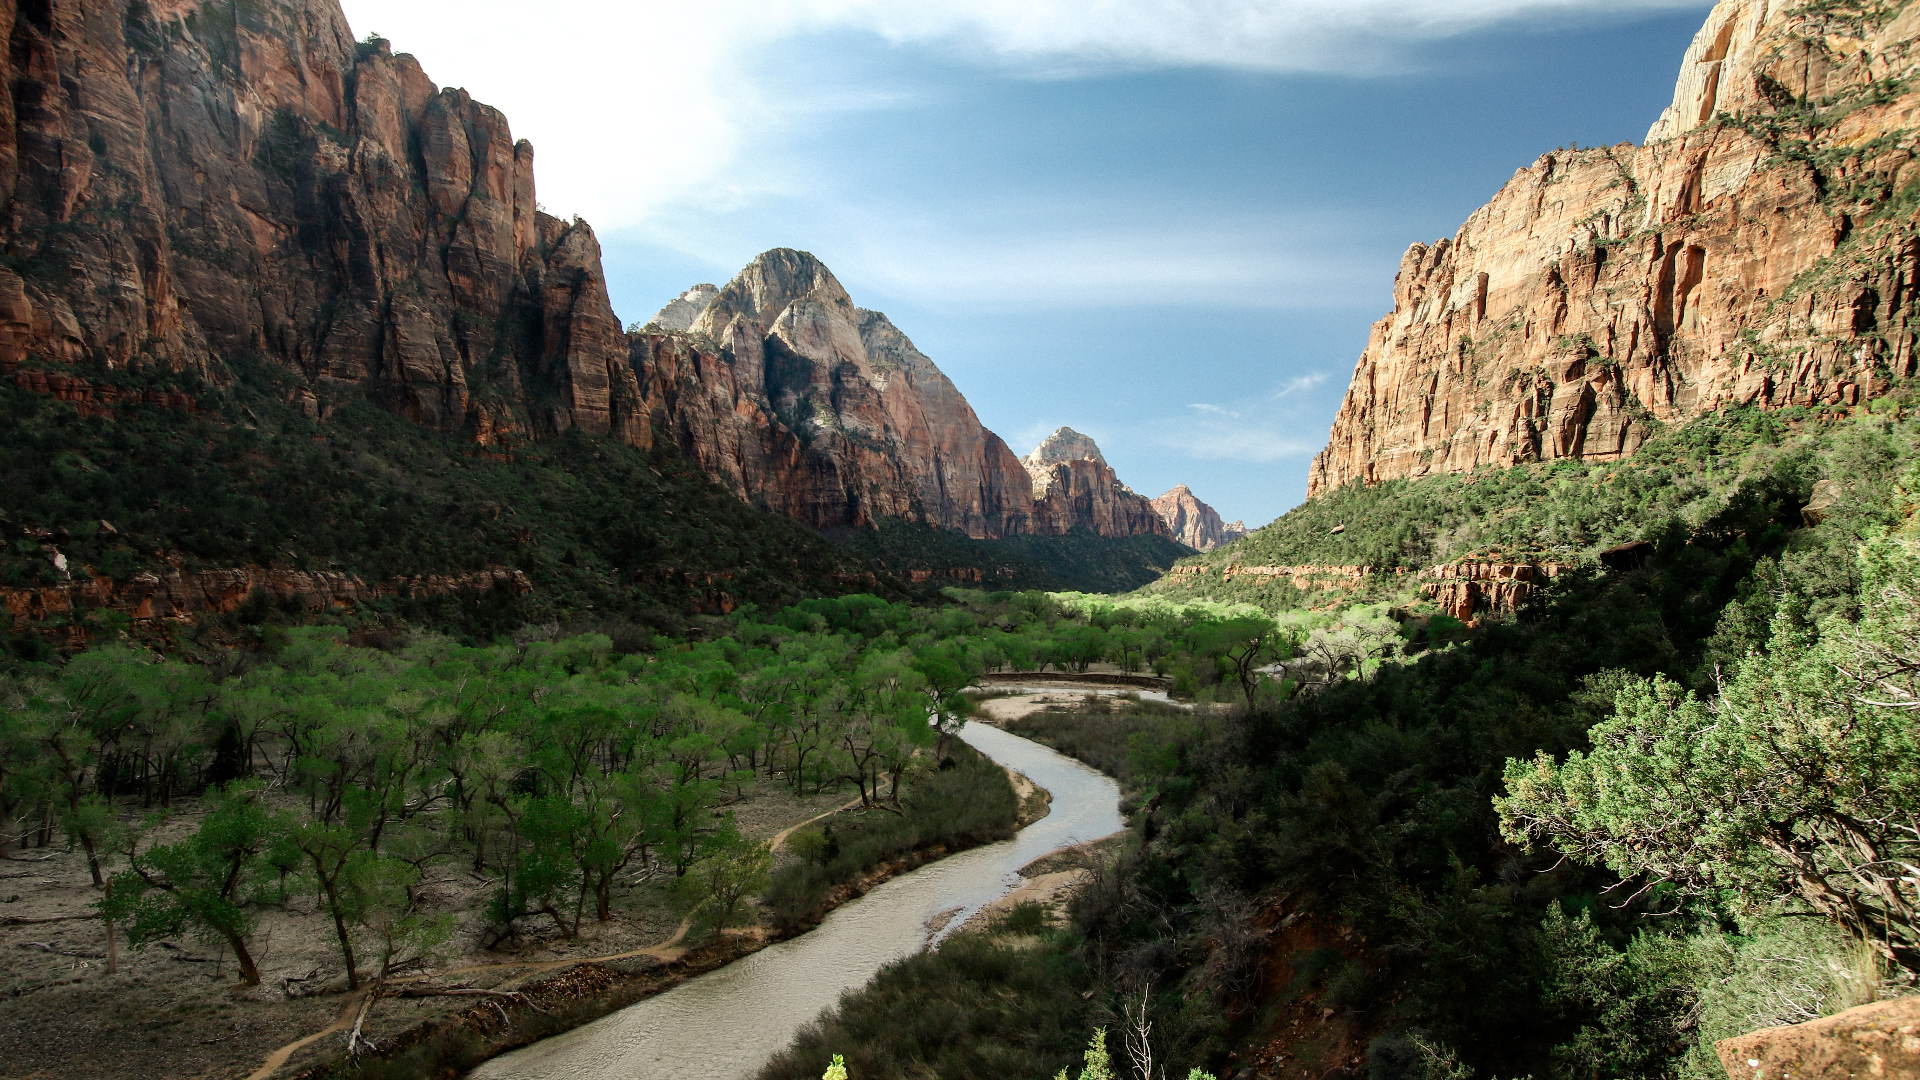 Nature Landscape Mountains Trees Rocks Plants Clouds Sky Valley Canyon Zion National Park USA Utah 1920x1080